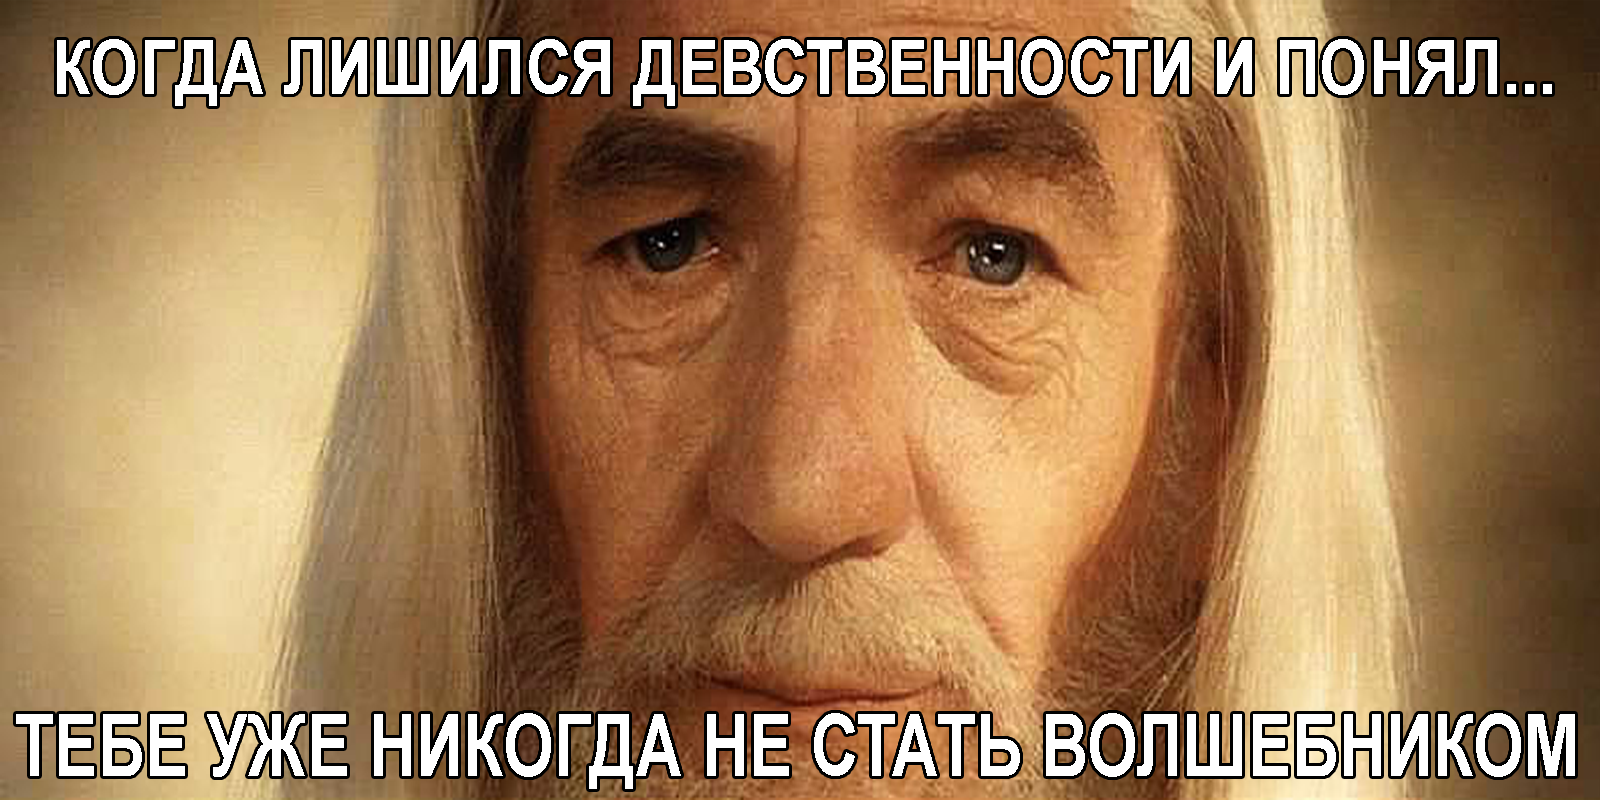 Tragedy - Gandalf, Lord of the Rings, Wizard, Adulthood, Wizards